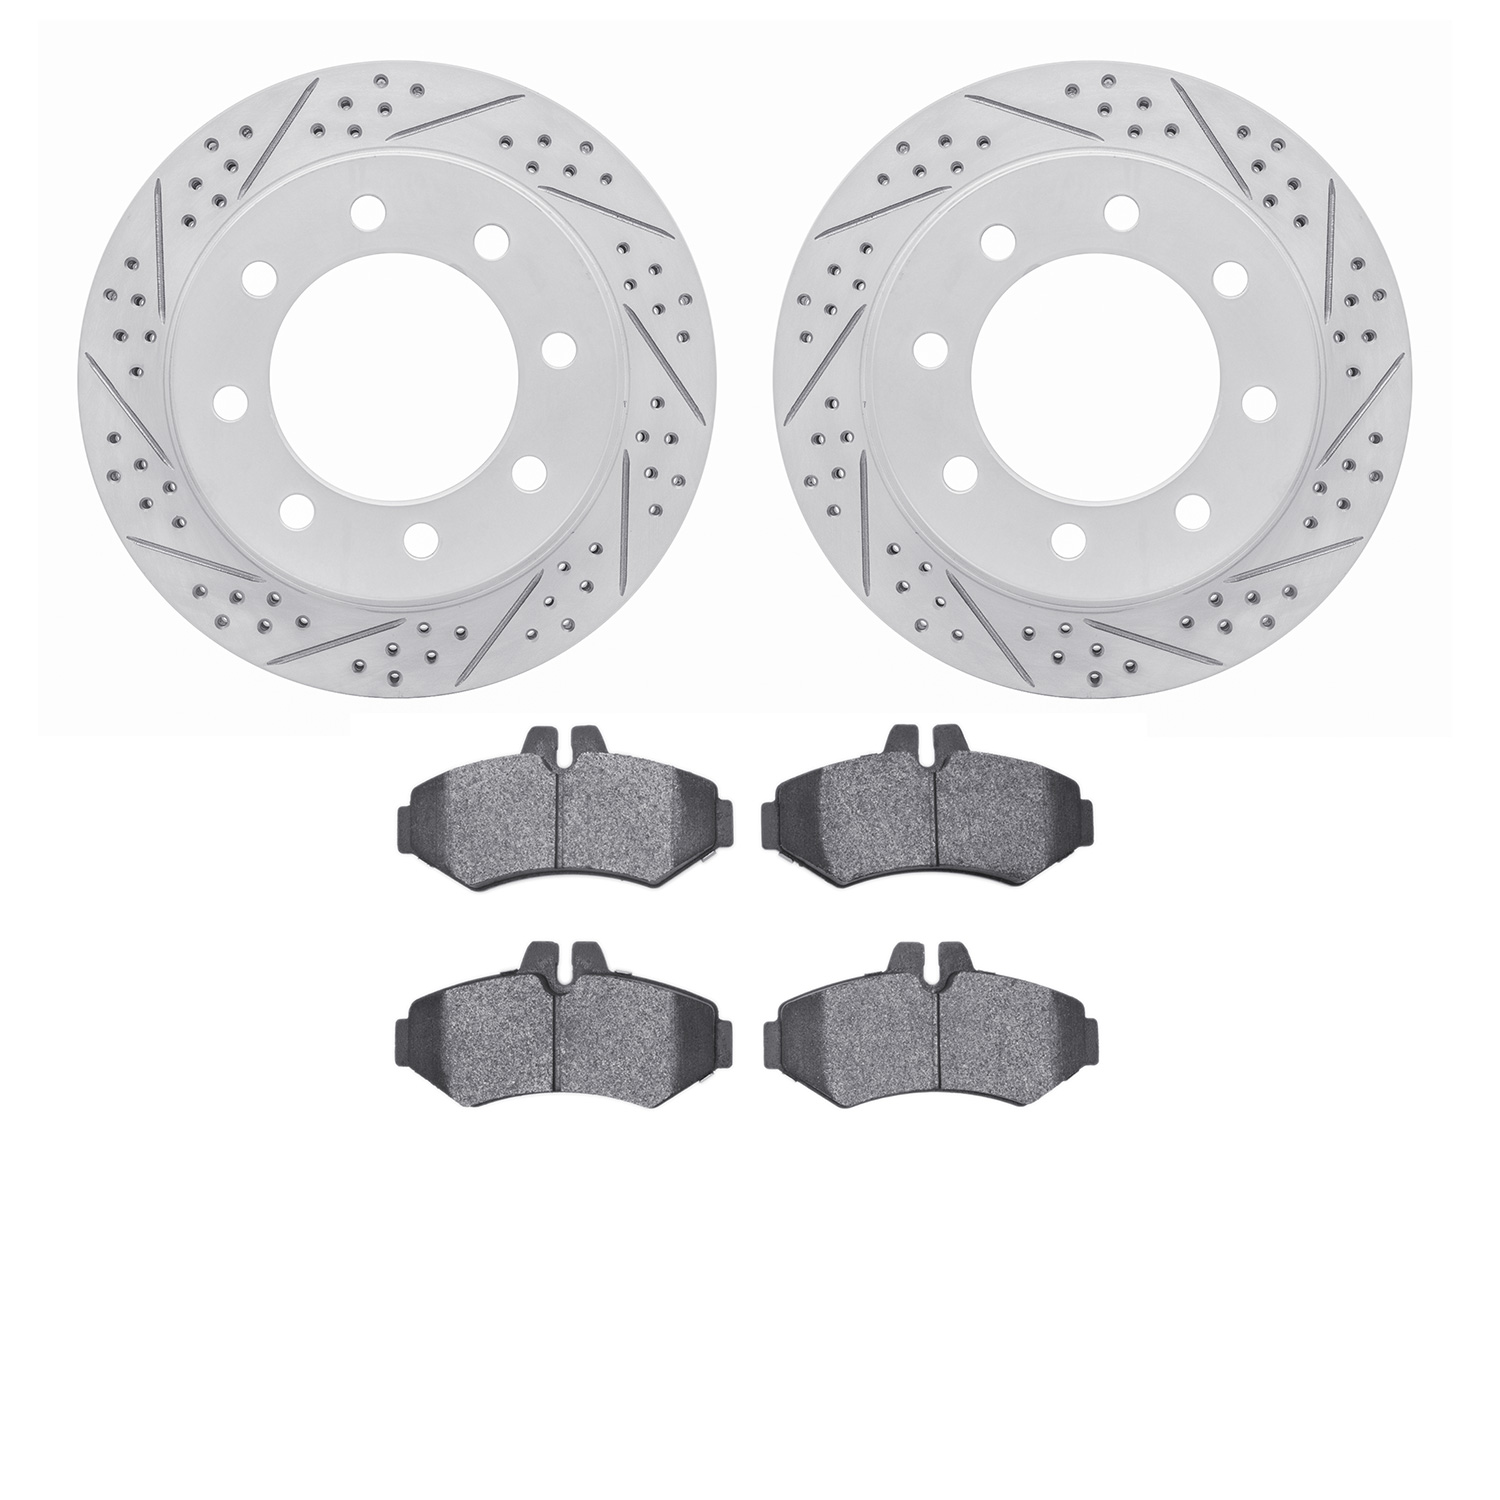 2502-40015 Geoperformance Drilled/Slotted Rotors w/5000 Advanced Brake Pads Kit, 2002-2018 Multiple Makes/Models, Position: Rear